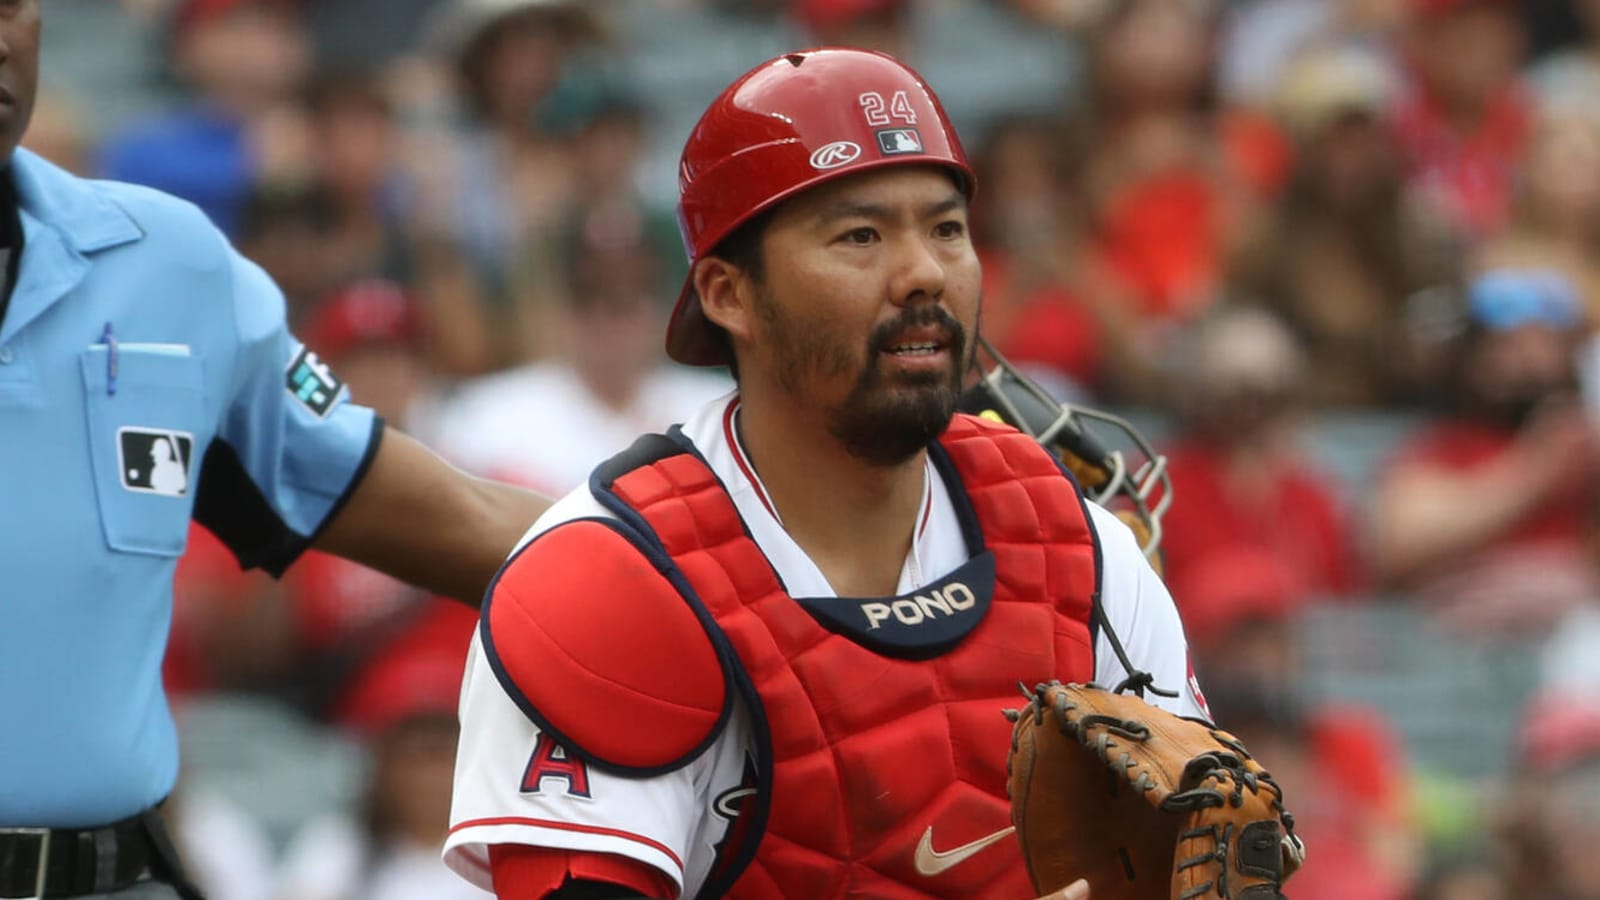 Angels' Kurt Suzuki suffers neck contusion after scary incident